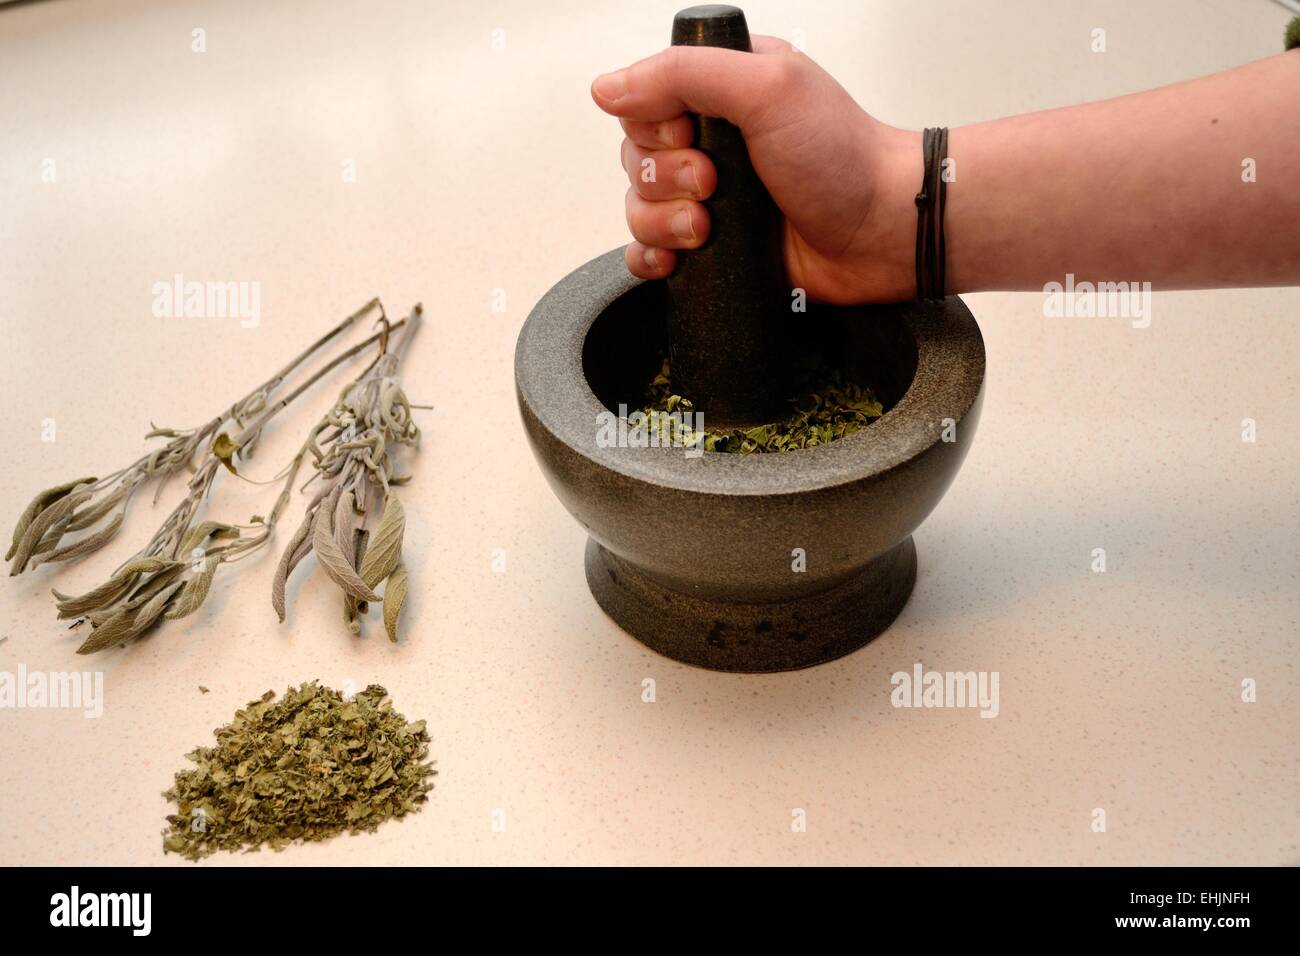 culinary herbs and mortar Stock Photo